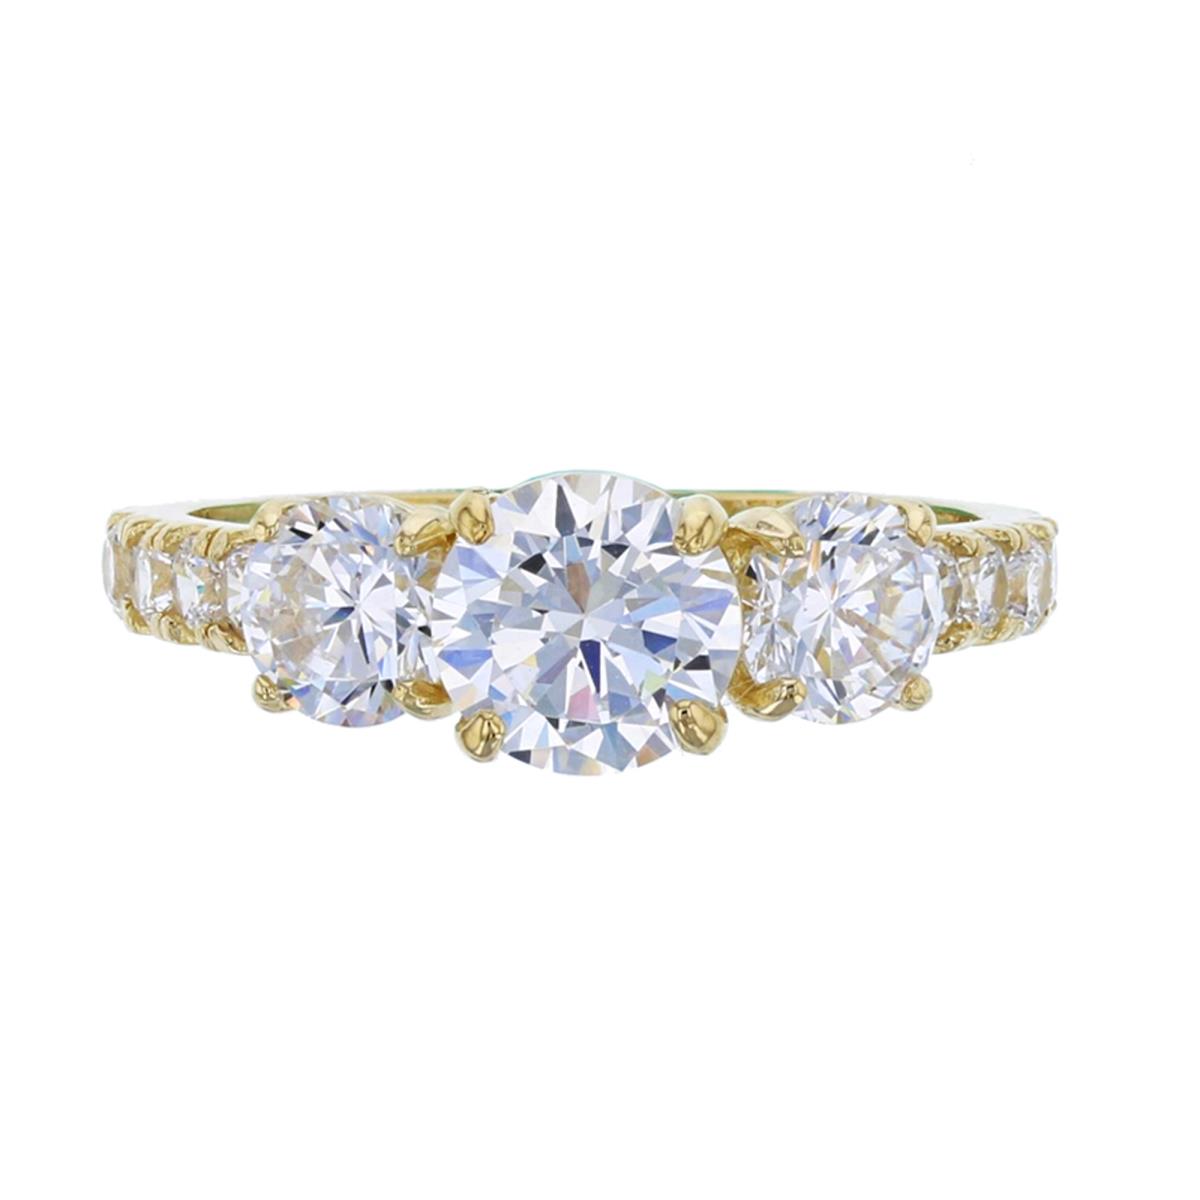 10K Yellow Gold 6.5mm & 5mm Rd Cut 3-Stone CZ Engagement Ring